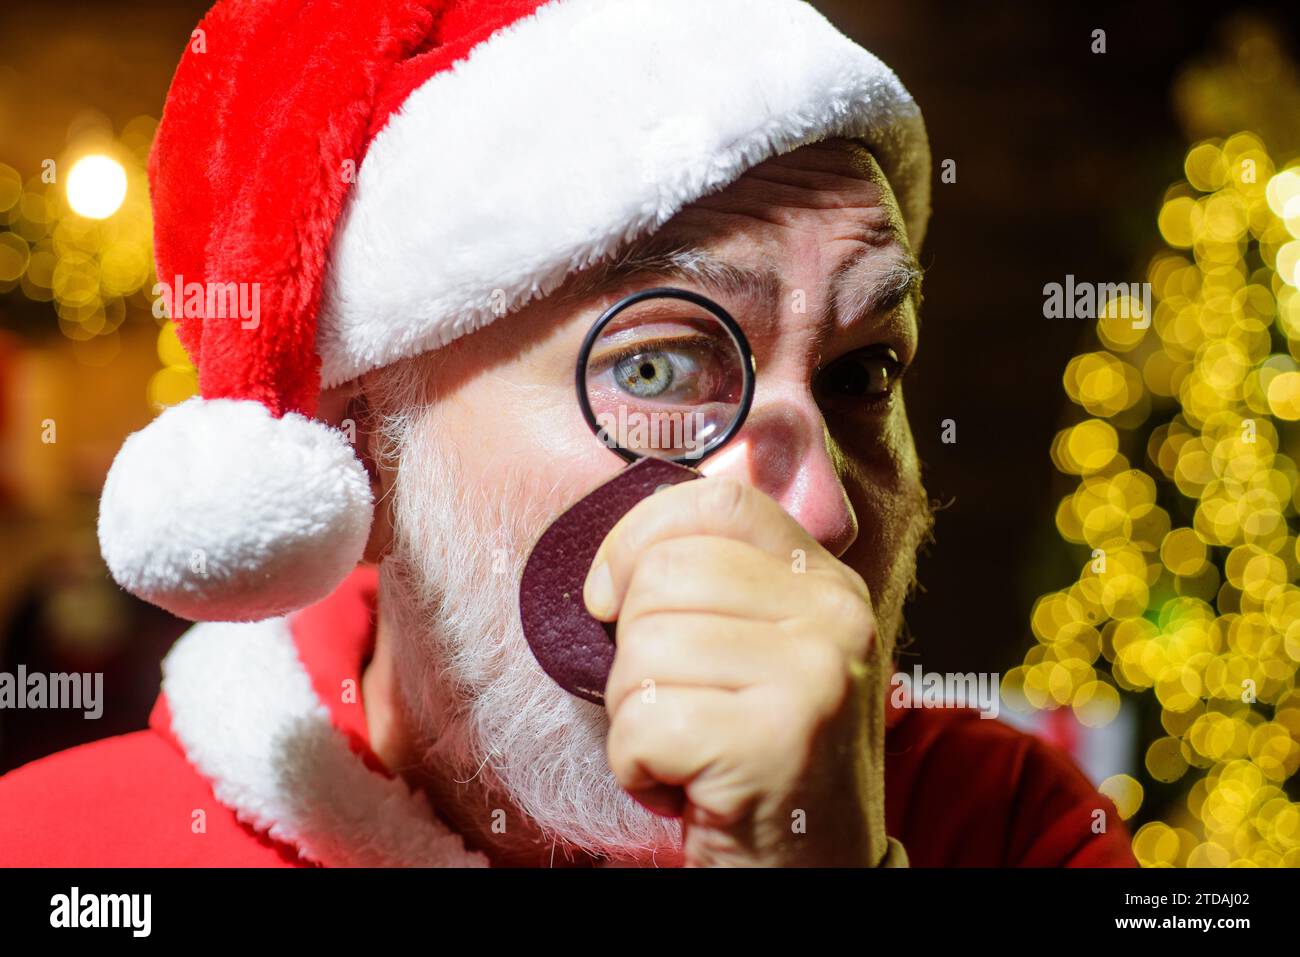 Christmastime. Santa Claus looking through magnifying glass. Closeup portrait bearded man in Santa Claus clothes with magnifier lens. Merry Christmas Stock Photo